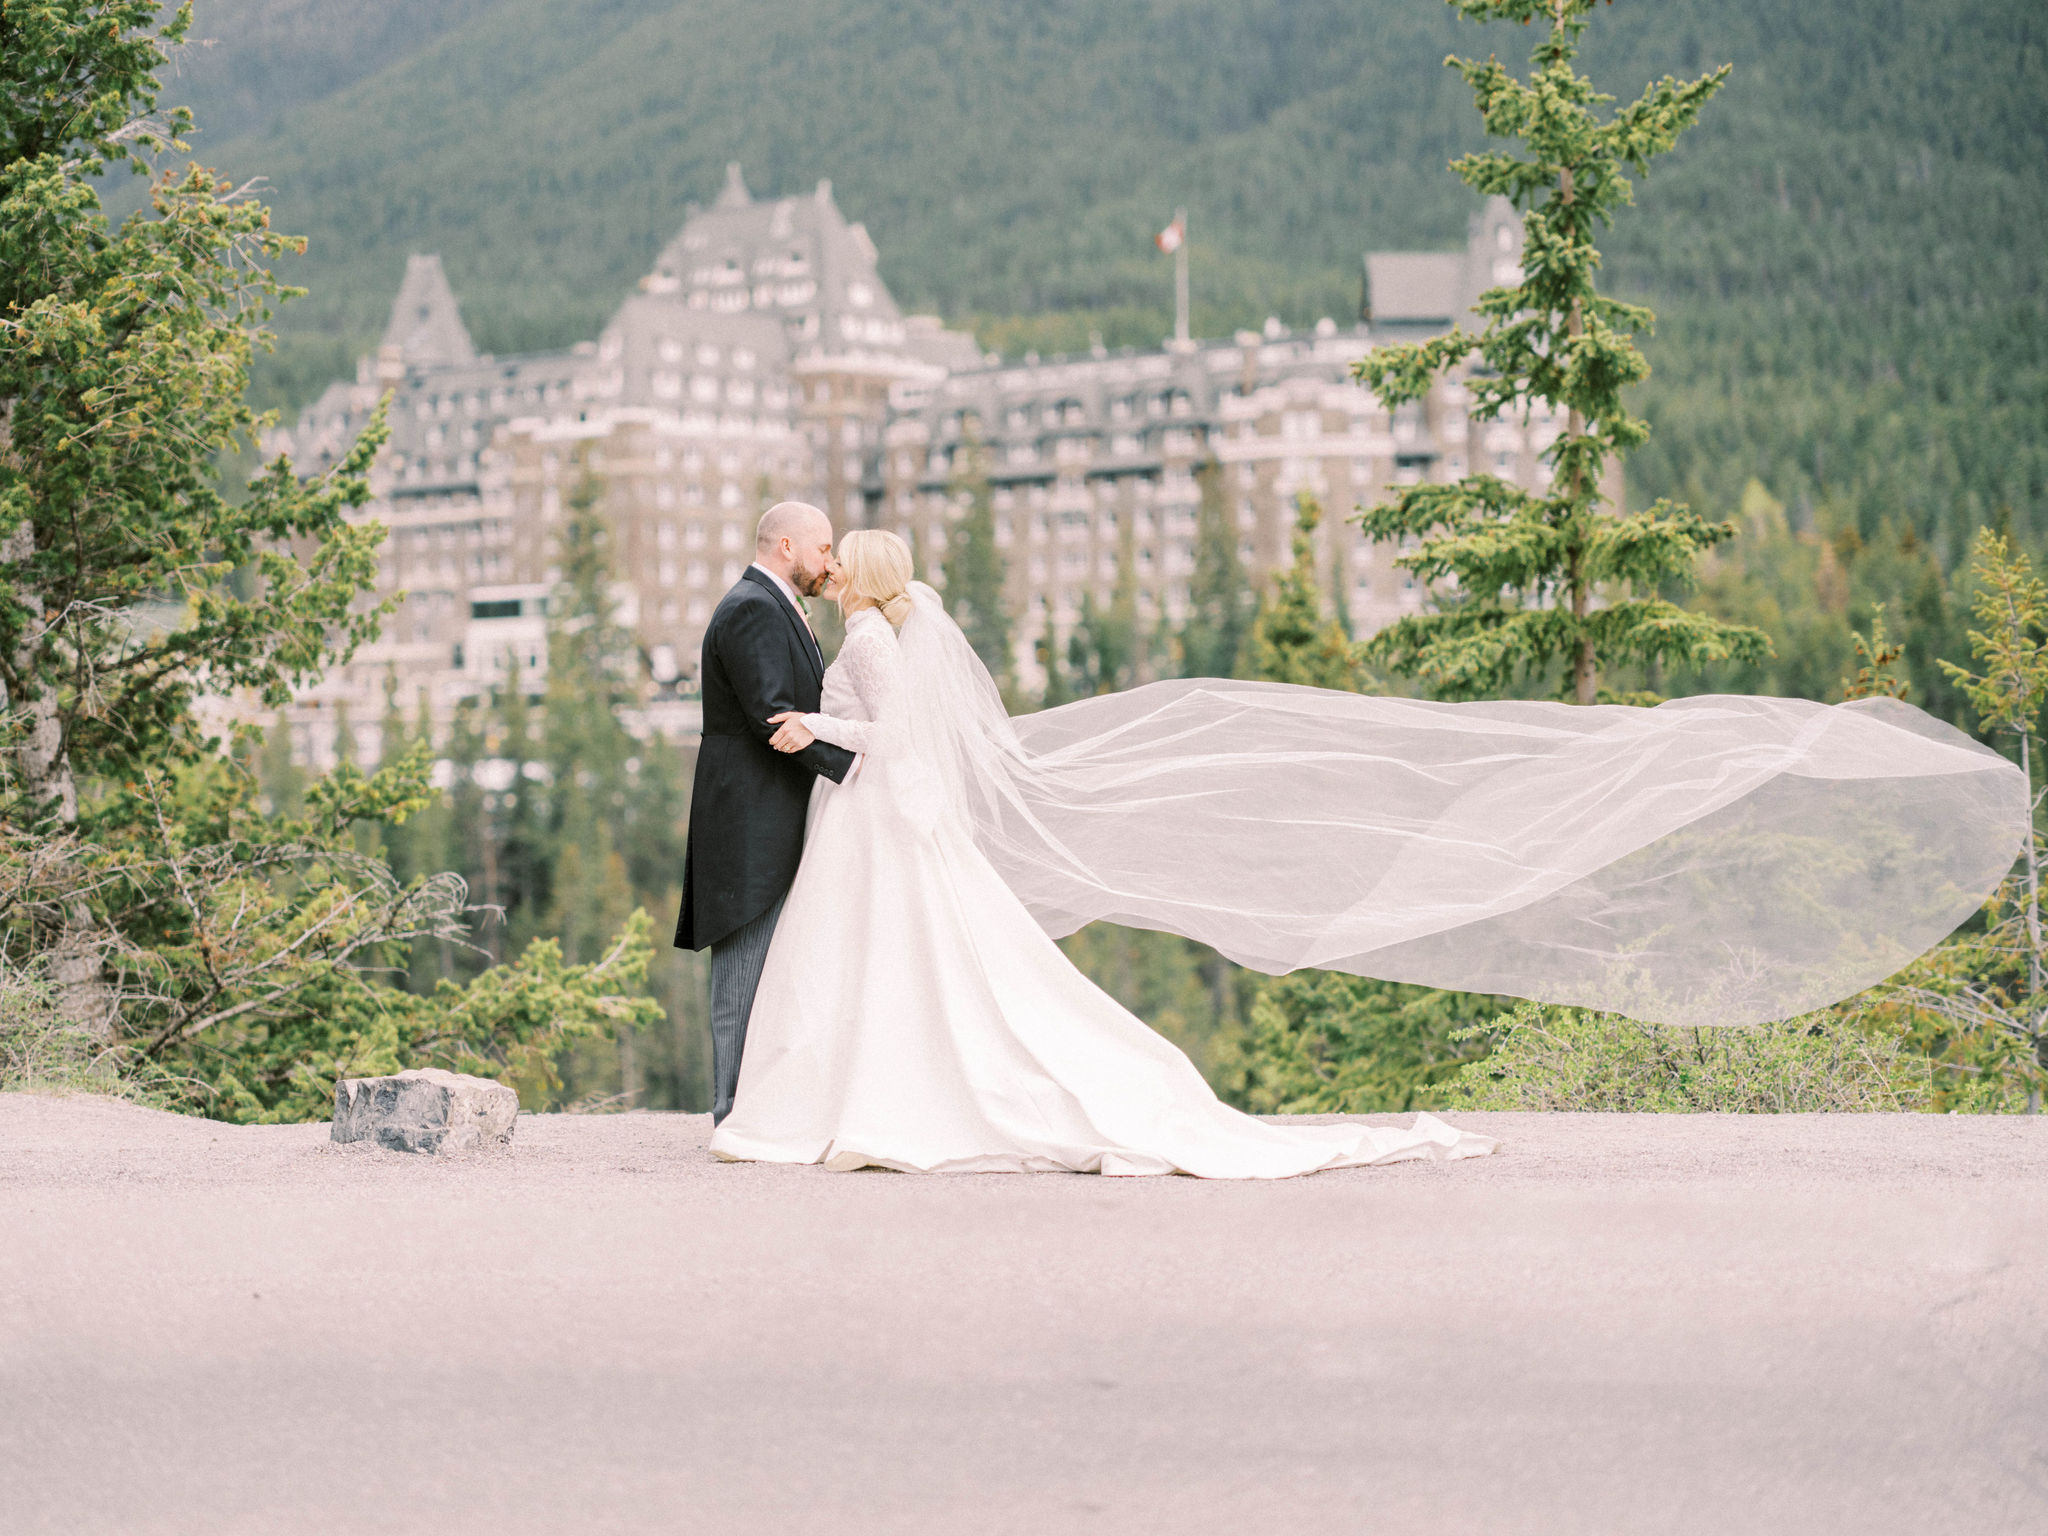 how to choose an editorial wedding photographer in calgary, editorial engagement, editorial wedding photos, editorial style wedding, floral ceremony arch, baby breath ceremony, fairmont castle wedding photo, fairmont wedding, nicole sarah